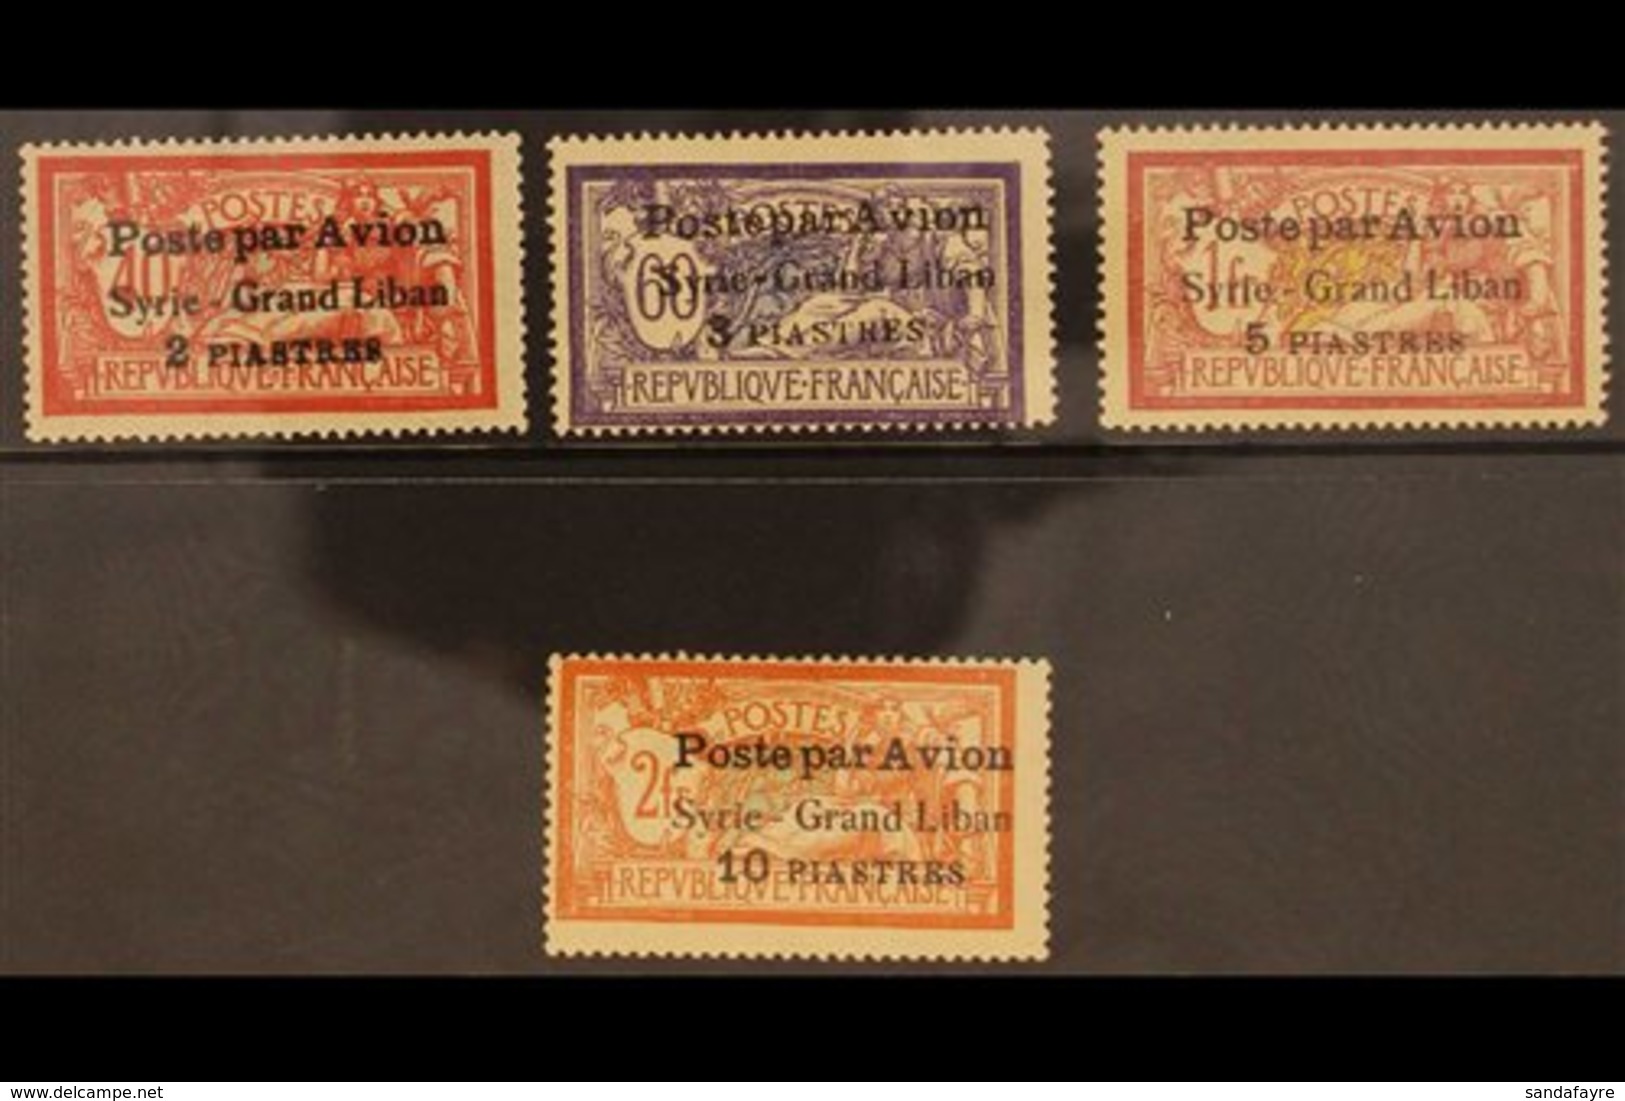 1923 Syria- Grand Liban Airmail Set Complete, 2½ Mm Spacing, SG 114/7, Very Fine Mint. (4 Stamps) For More Images, Pleas - Syrië